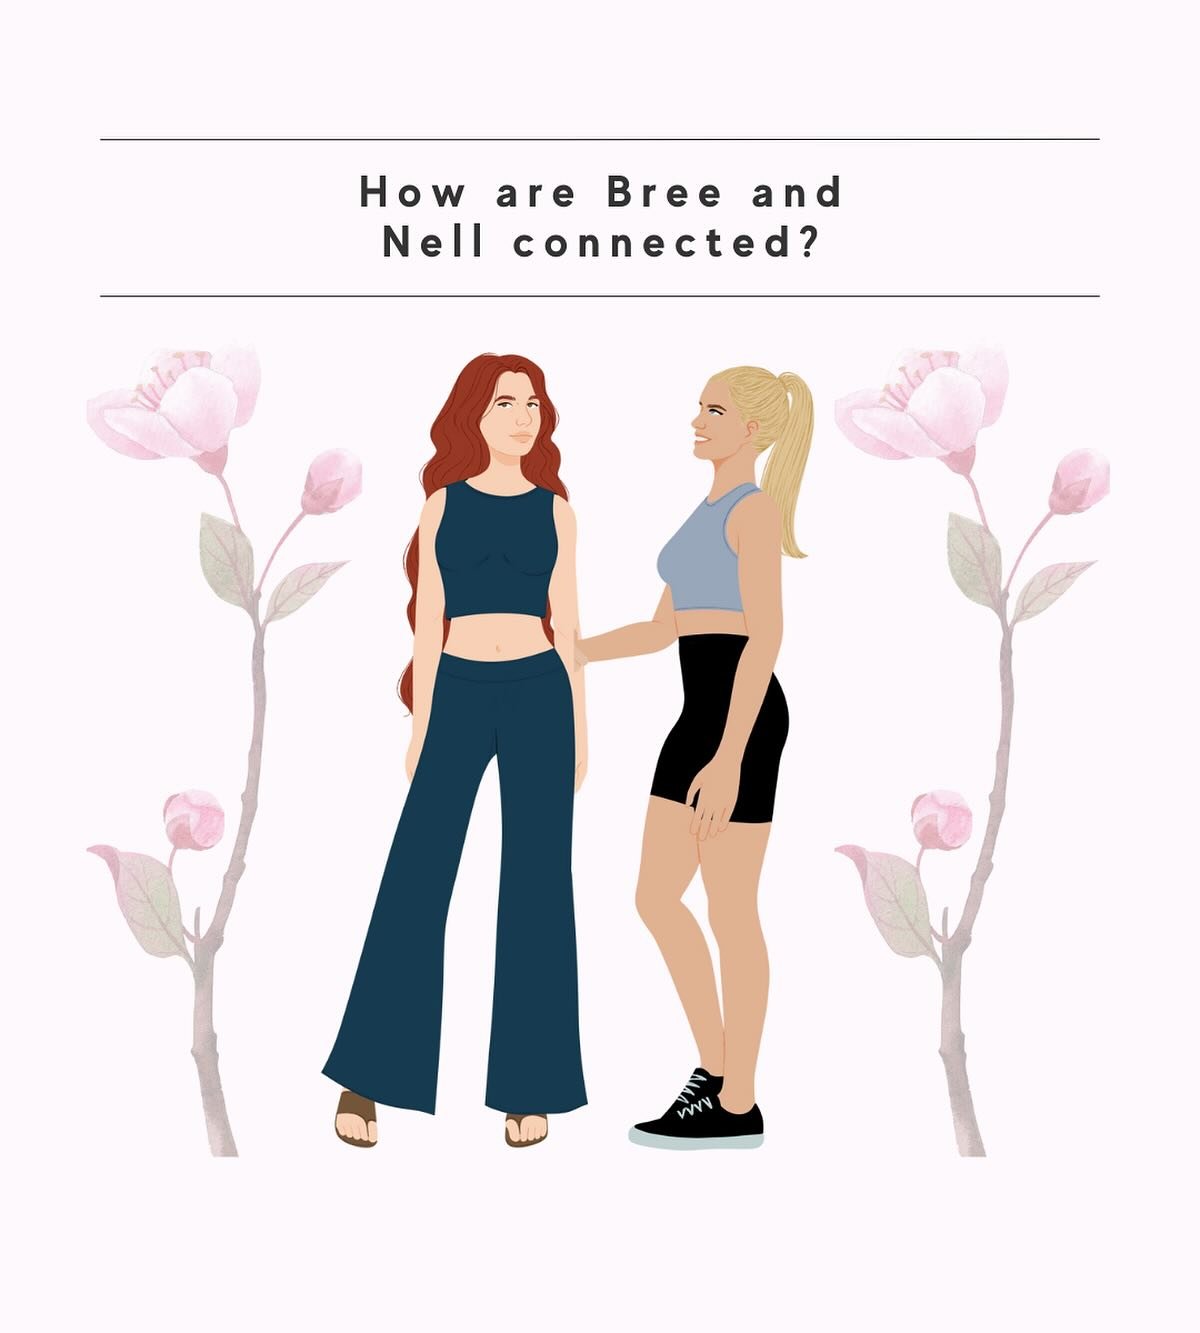 The core group of the An Unlikely Romance series are four friends: Max, Alex, Liam, and Larson. And apparently, they are drawn to strong women! 

The main connection between Bree and Nell is that Bree married Alex, and Nell is Alex&rsquo;s sister-in-